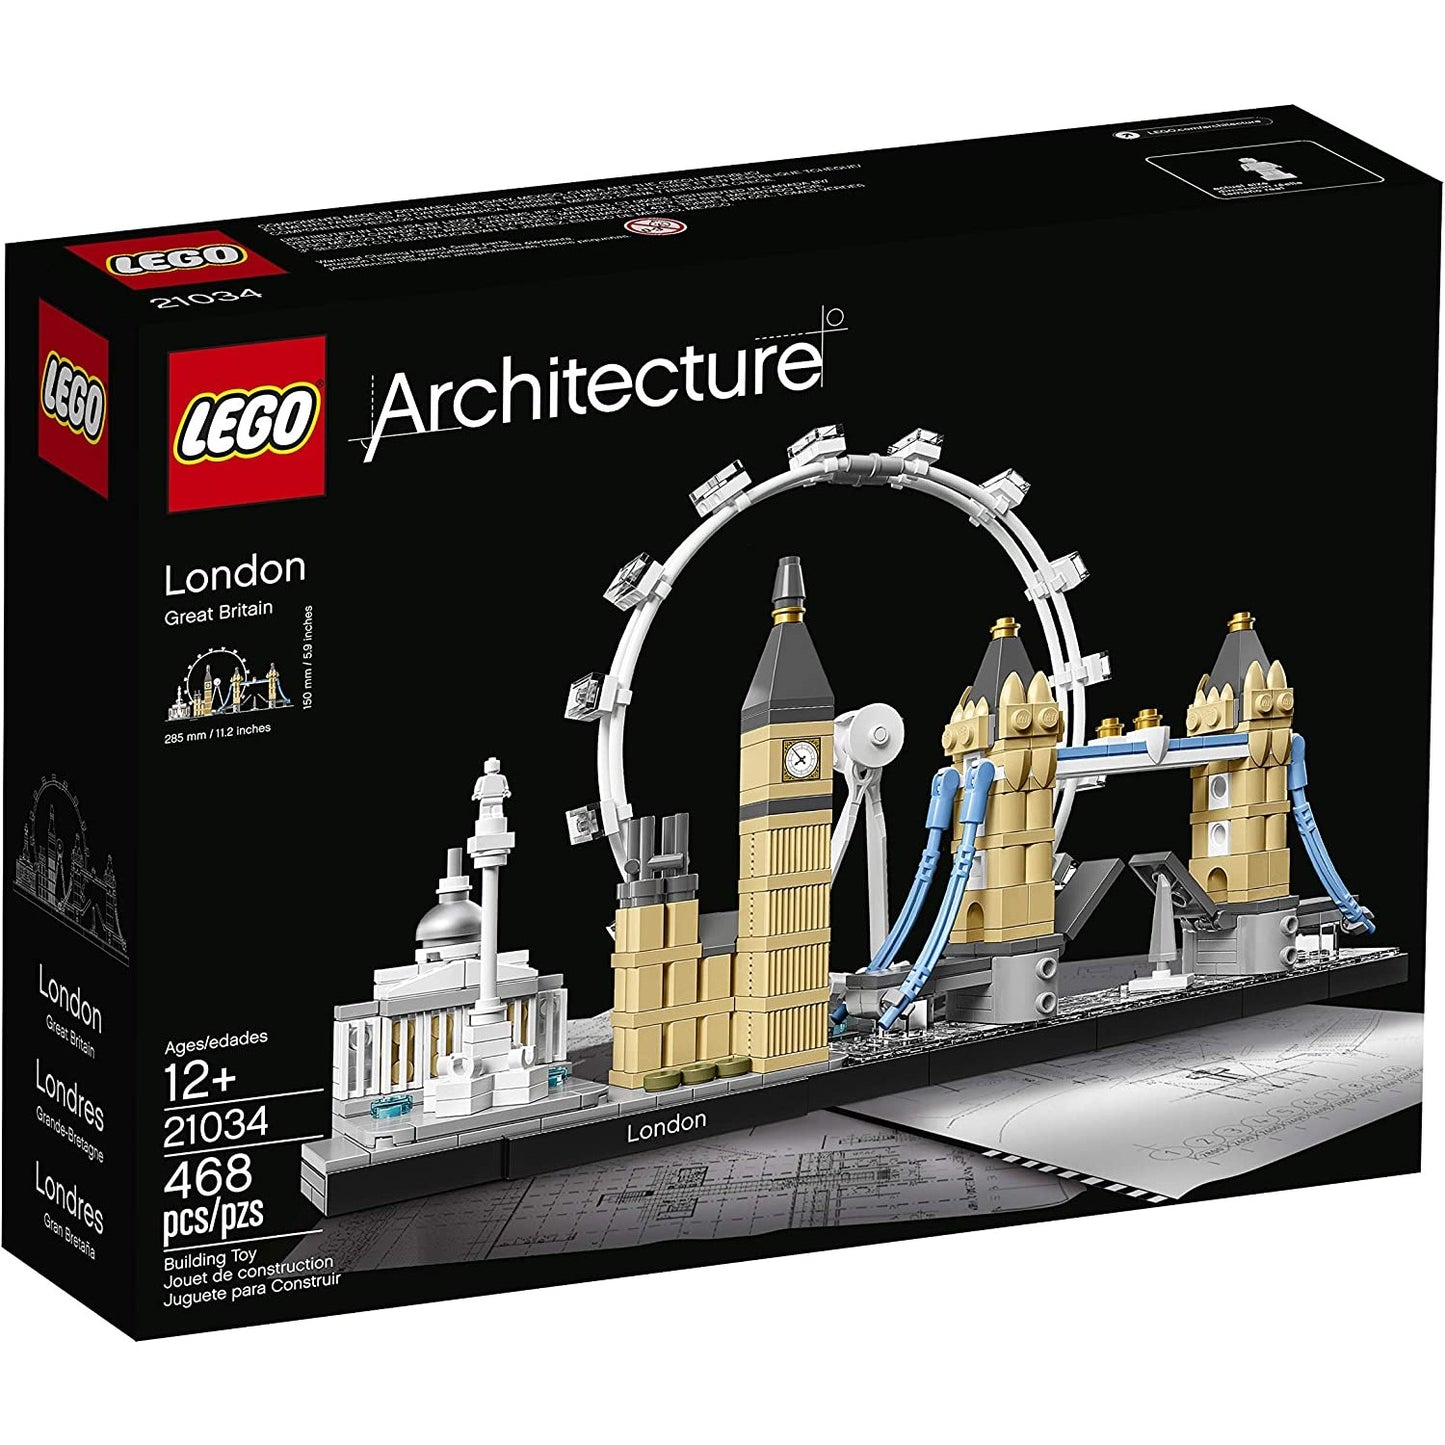 The front of the box for the Lego architecture London building set.